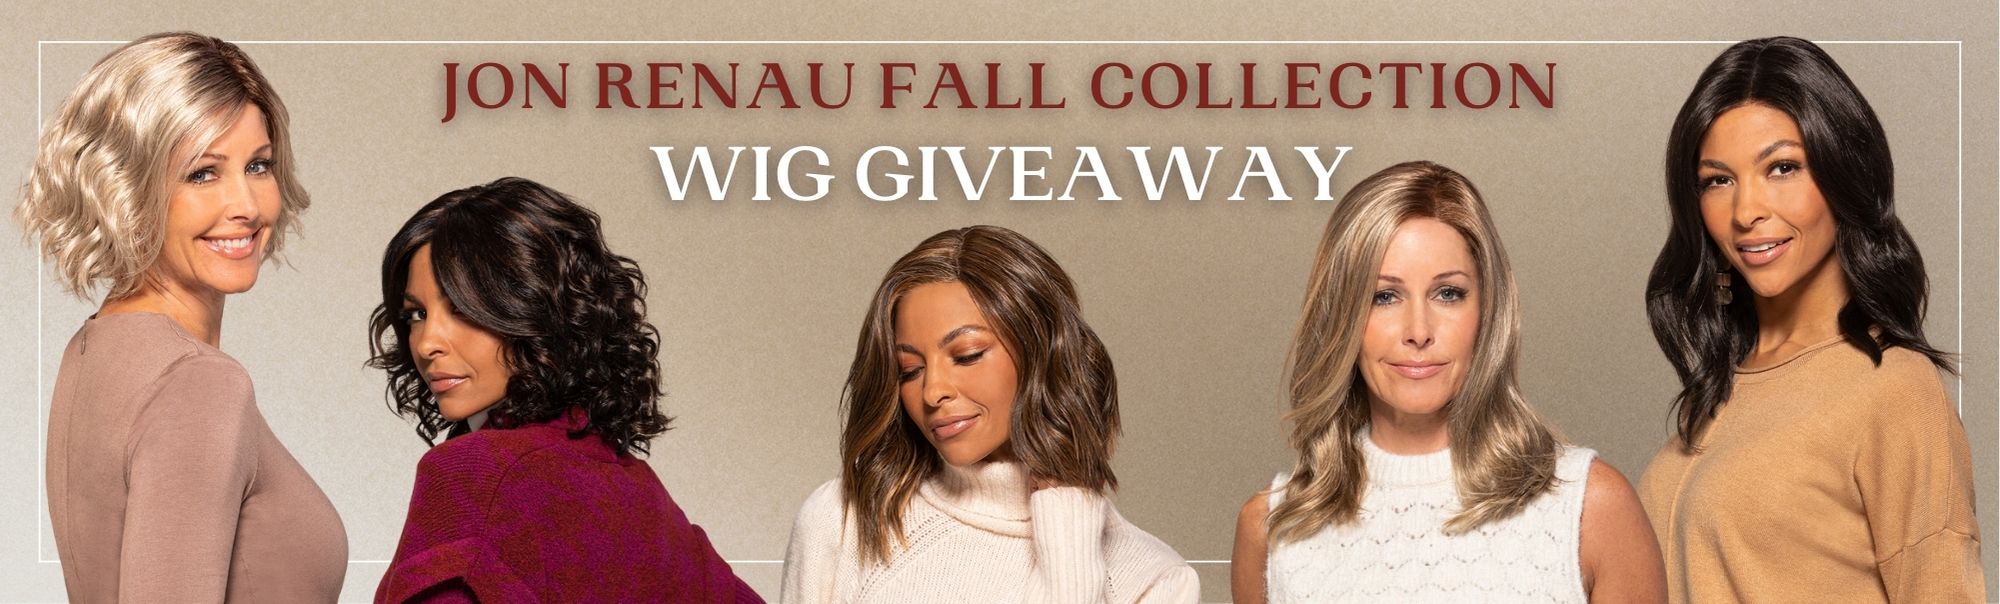 Wig Giveaway and Photo Contest! Win A Jon Renau Fall Collection Wig-- Details Inside.